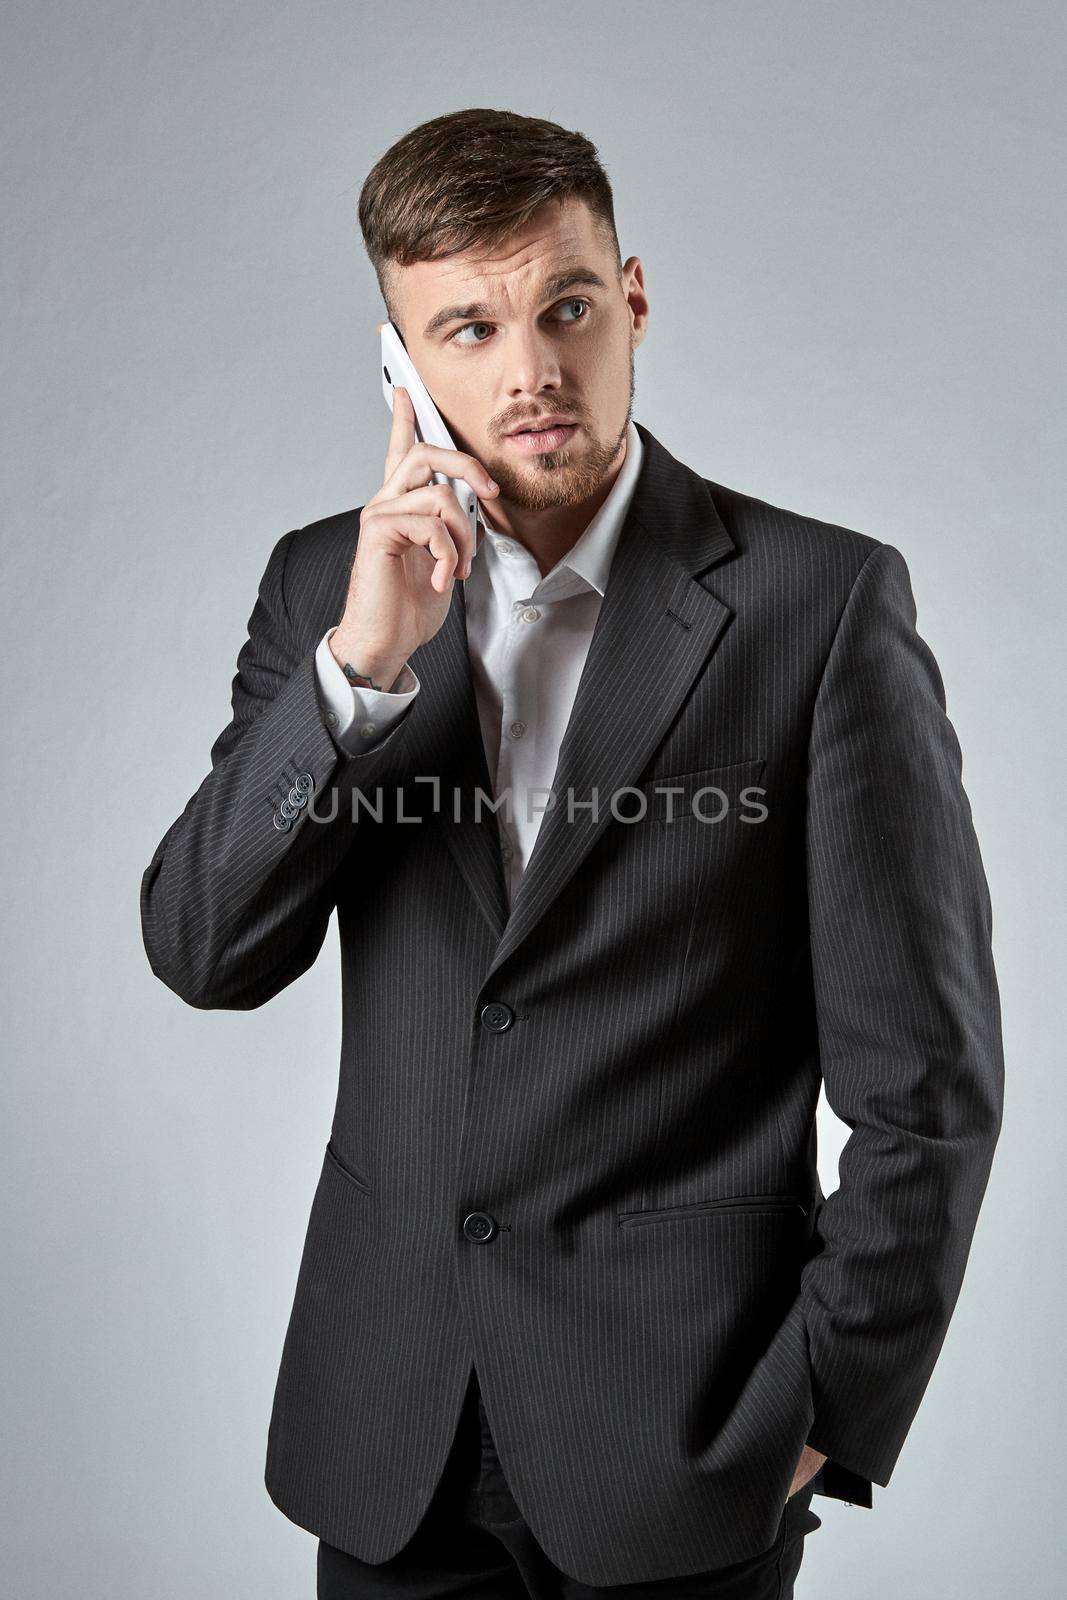 Portrait of a handsome businessman making a phone call against a grey background. Emotions